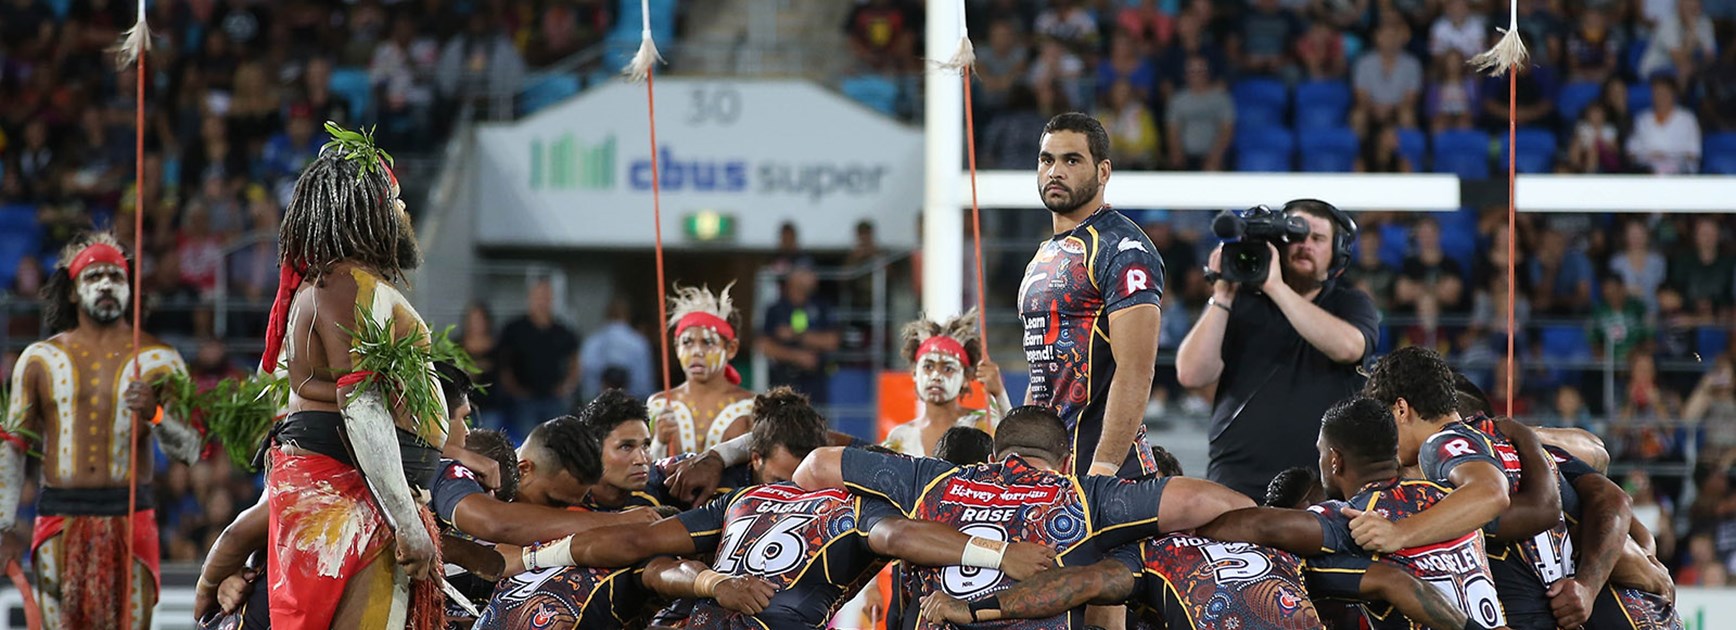 Greg Inglis and the Indigenous All Stars before the 2015 NRL All Stars game.